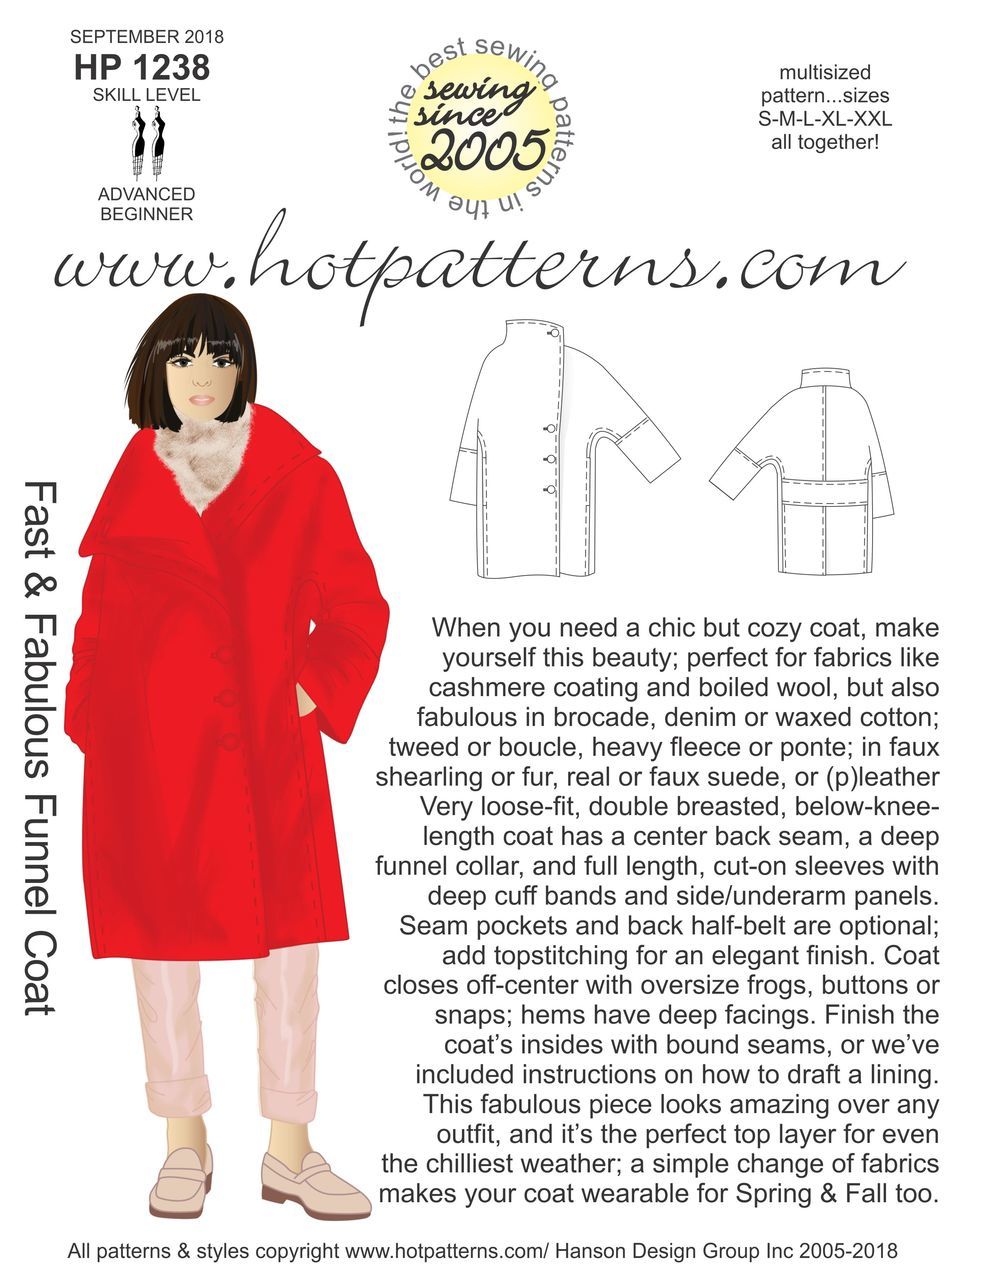 New from Hot Patterns - the Funnel Coat is here!!